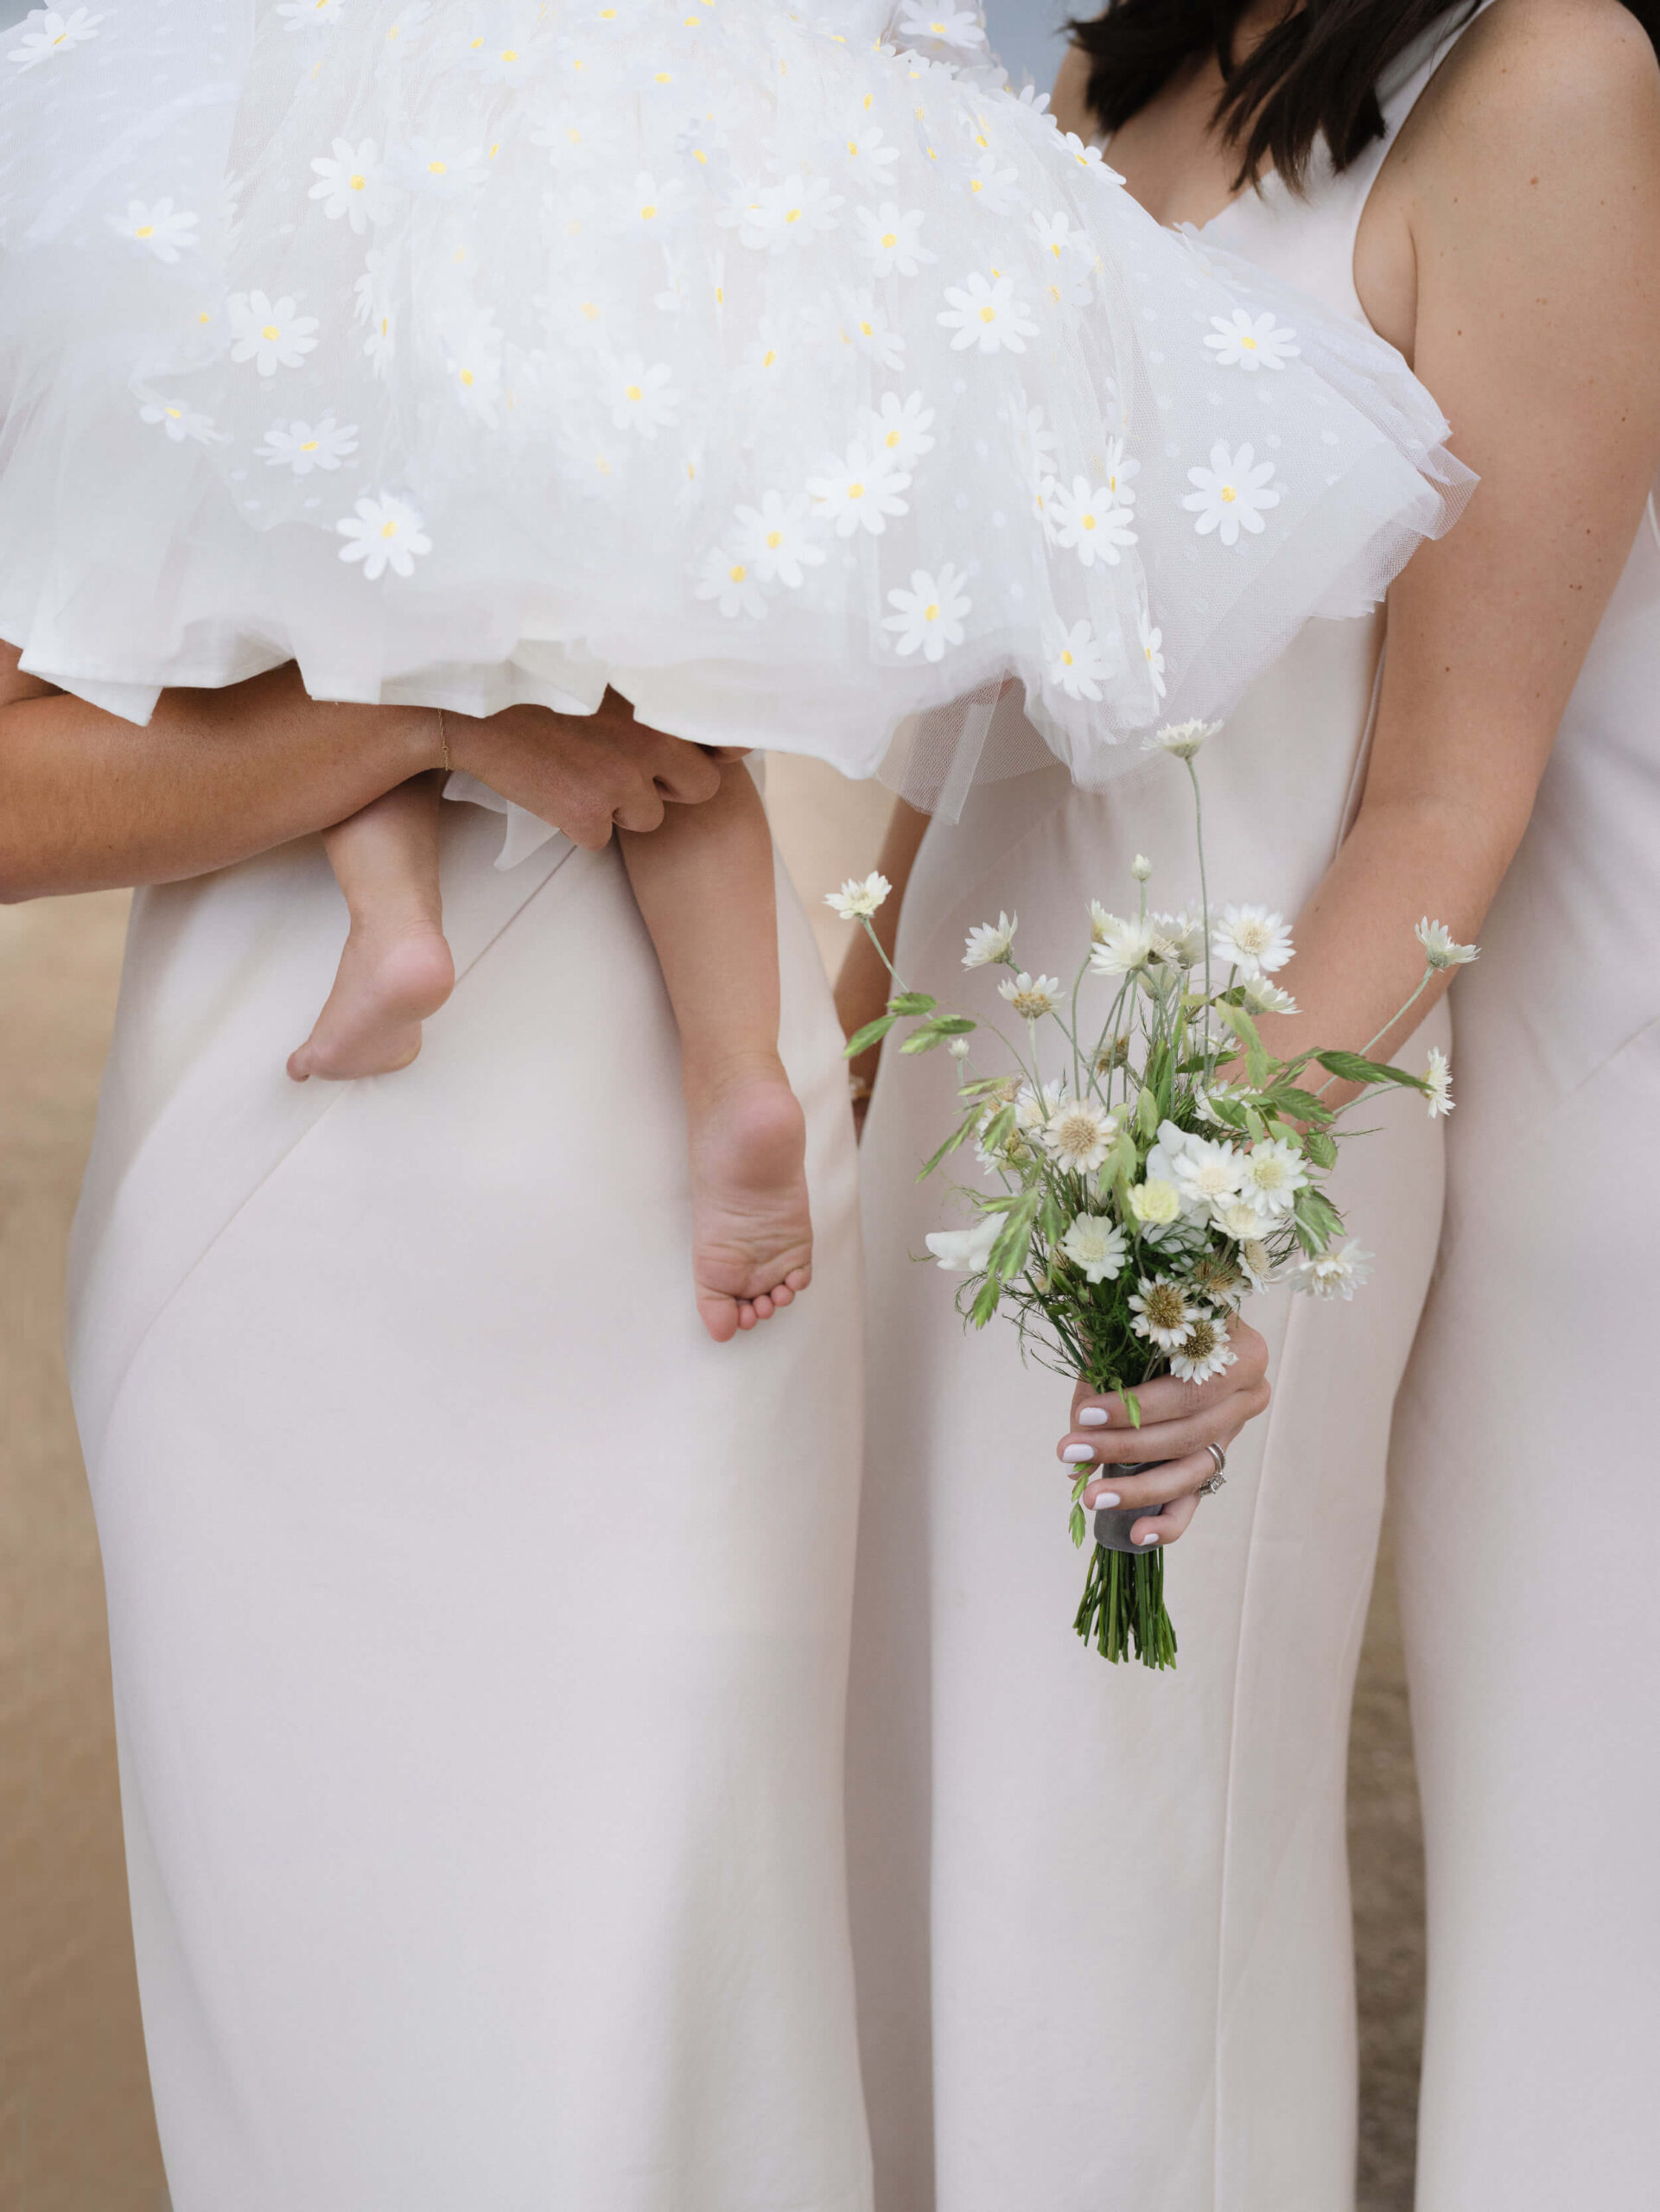 Bridesmaids holding a baby and flowers